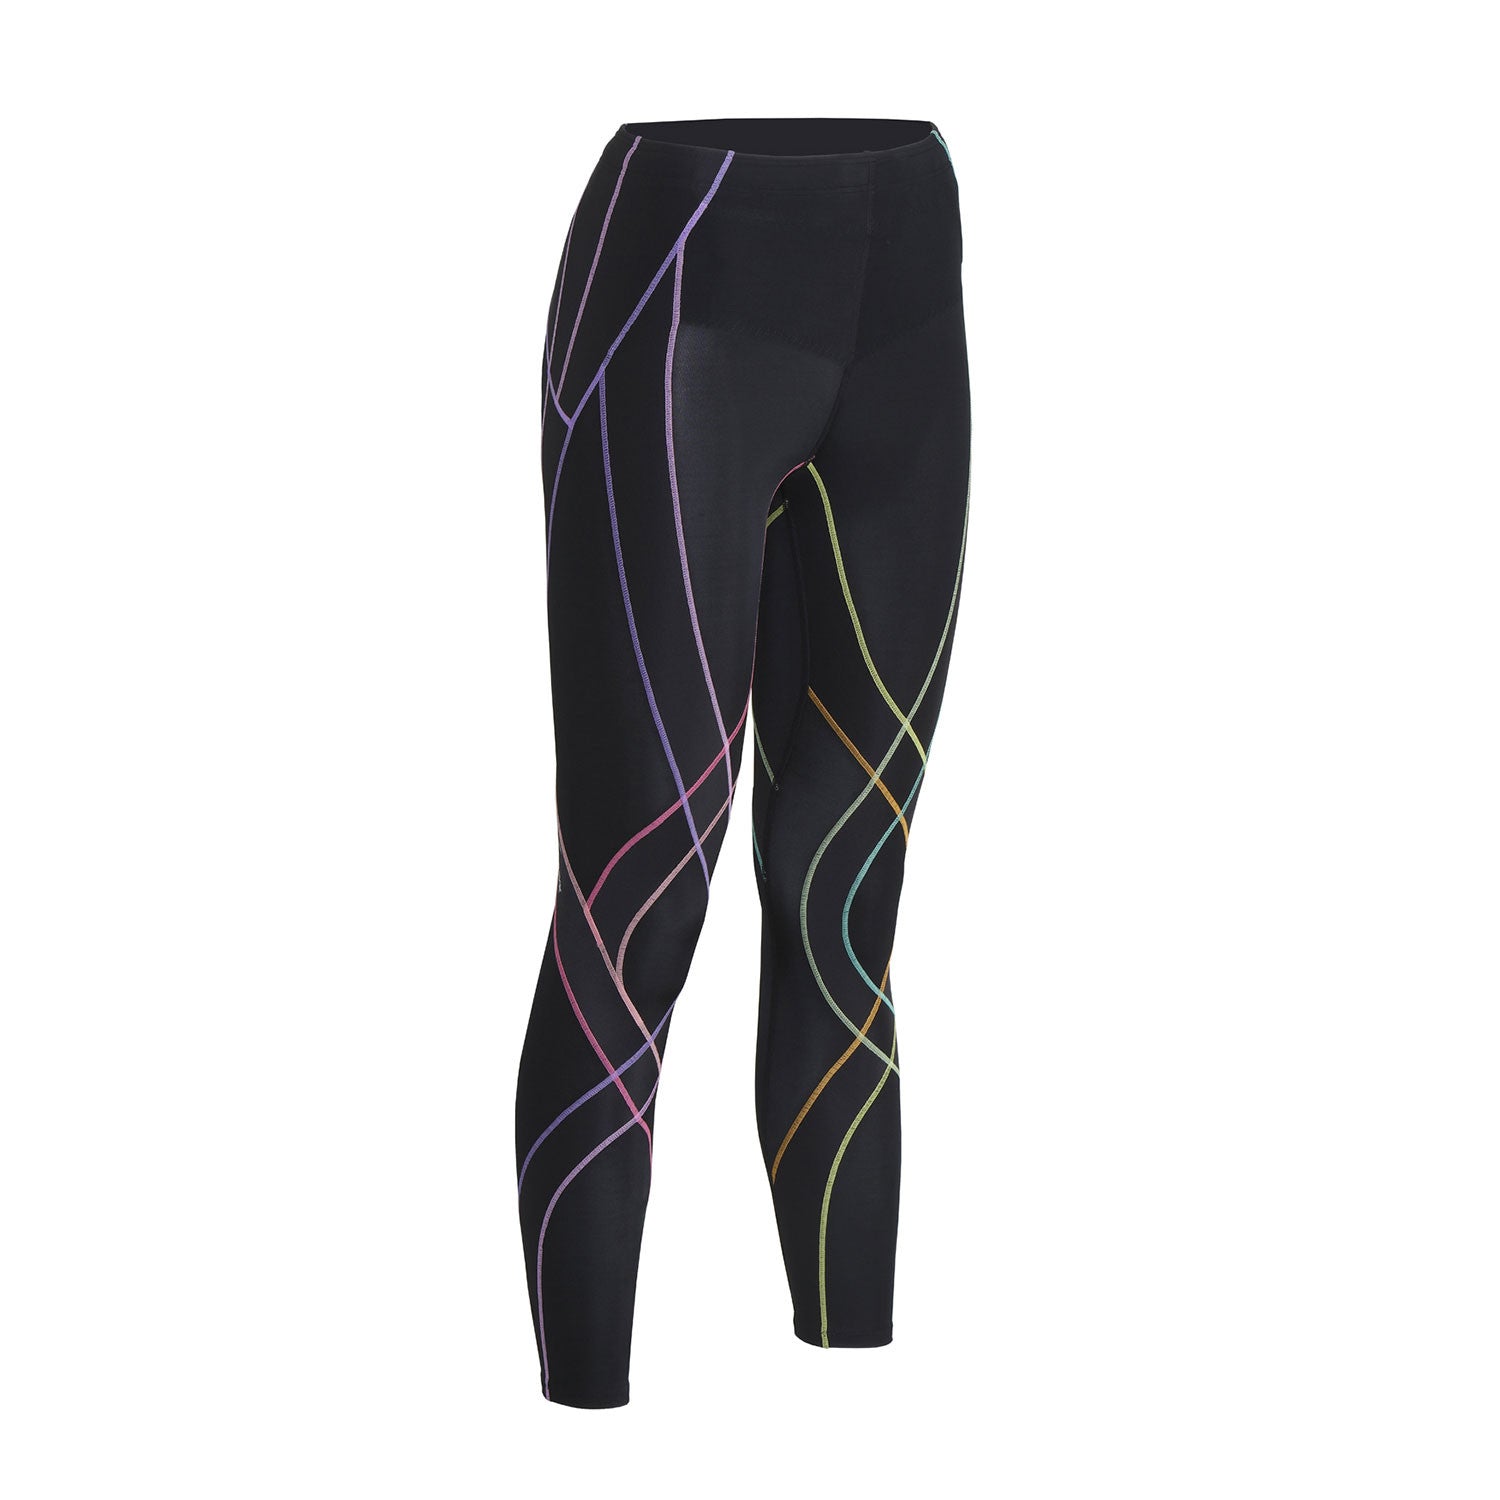 CW-X Endurance Generator Tights (Black/Pastel Rainbow) Women's Workout The  athletic and supportive CW-X Enduranc…